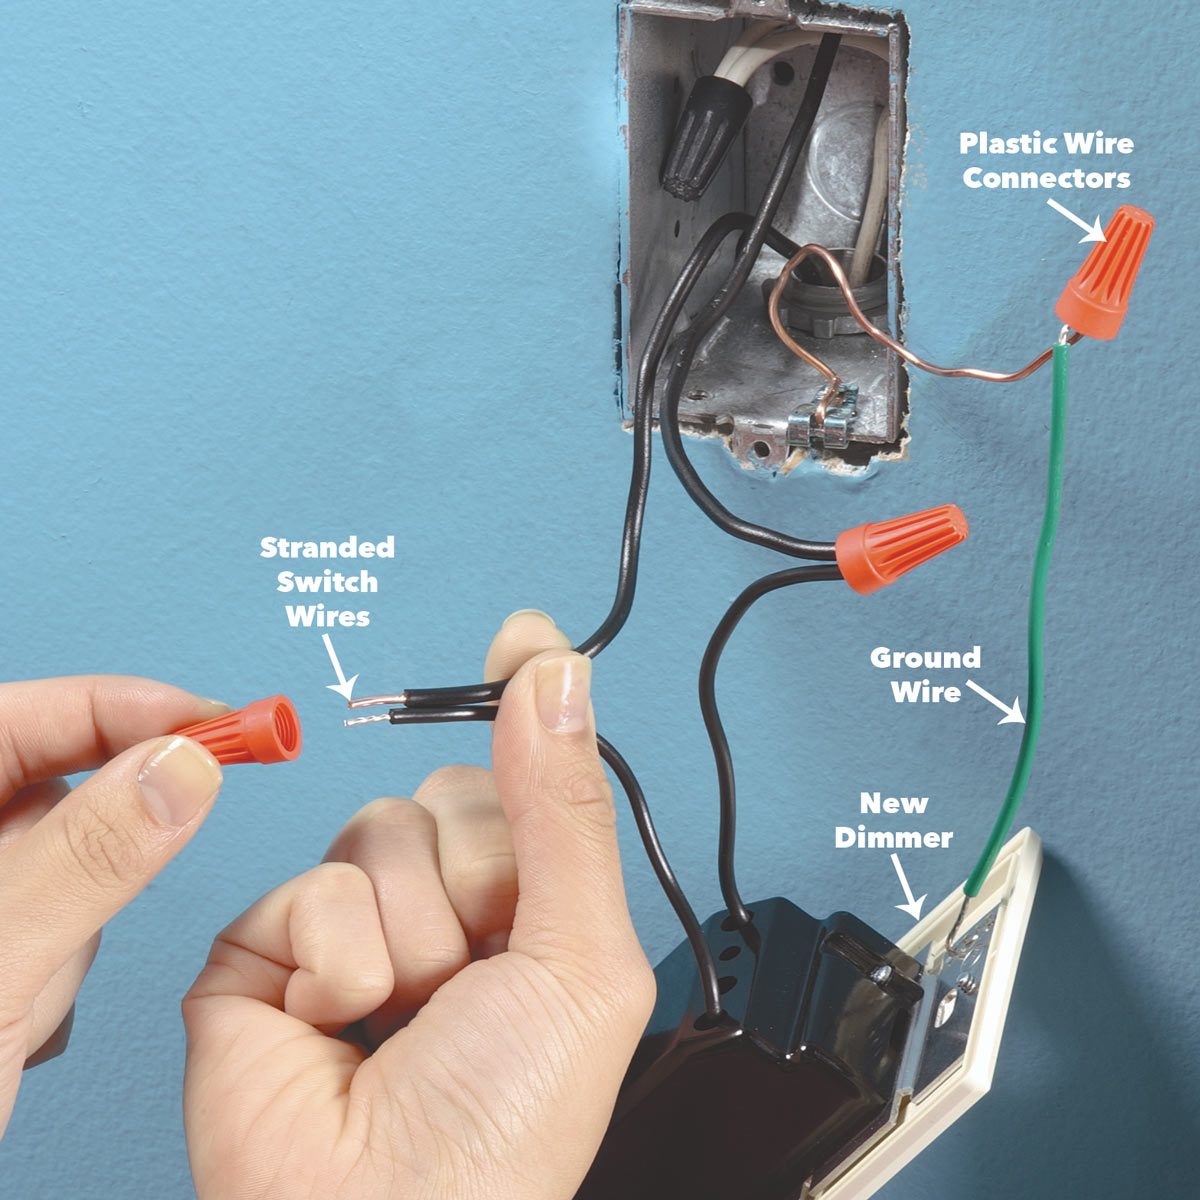 How to Install a Dimmer Light Switch: Wiring and Replacement